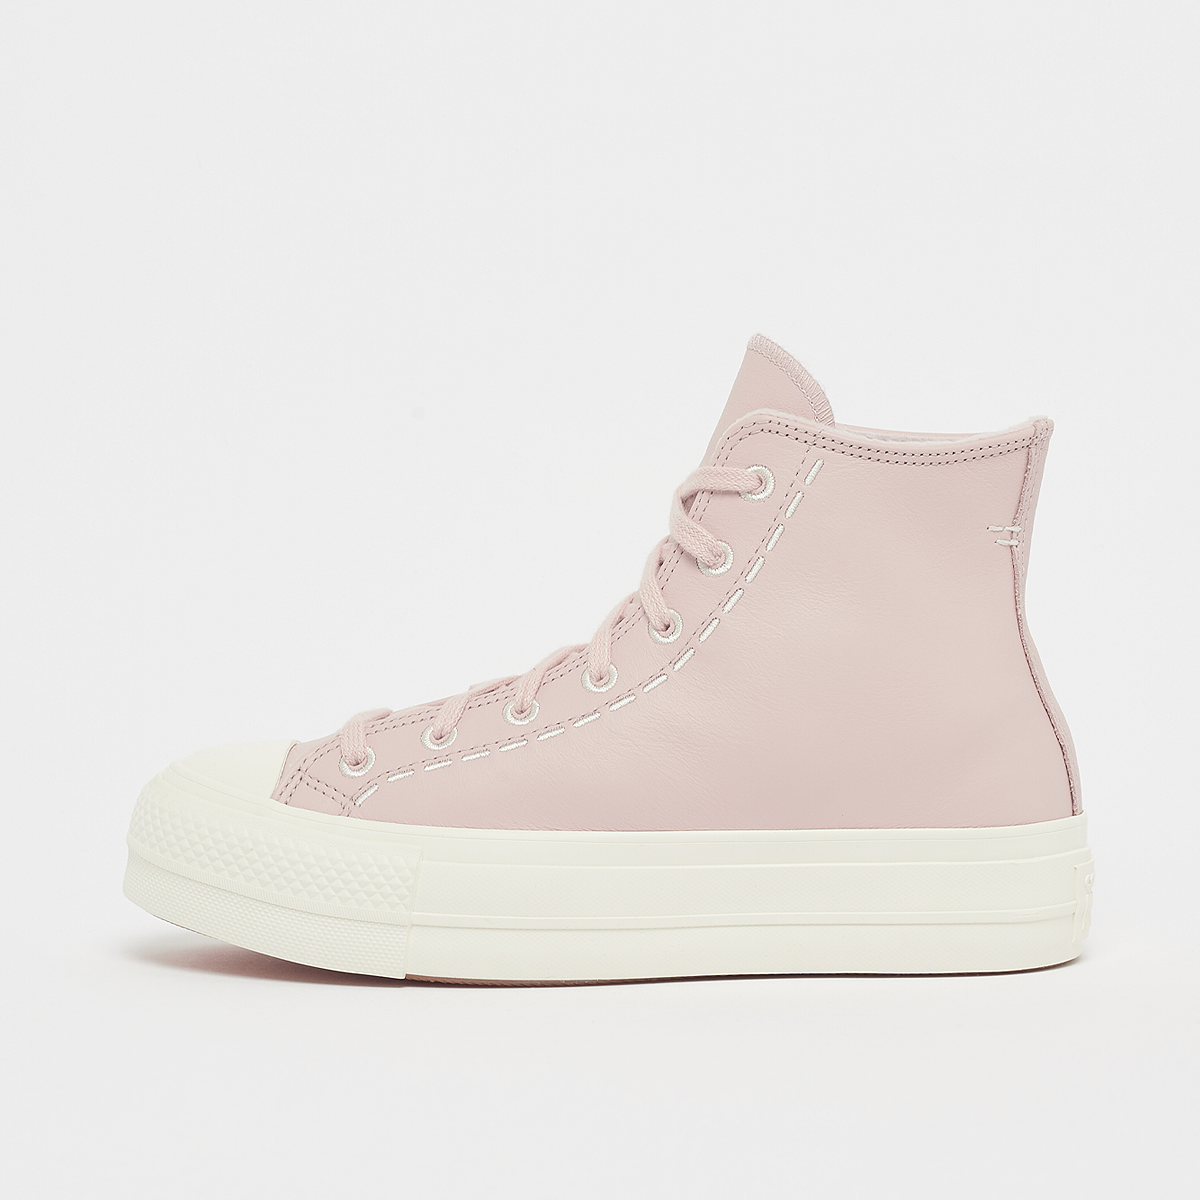 Chuck Taylor All Star Lift, Converse, Footwear, pink sage/pink sage/egret, taille: 39.5